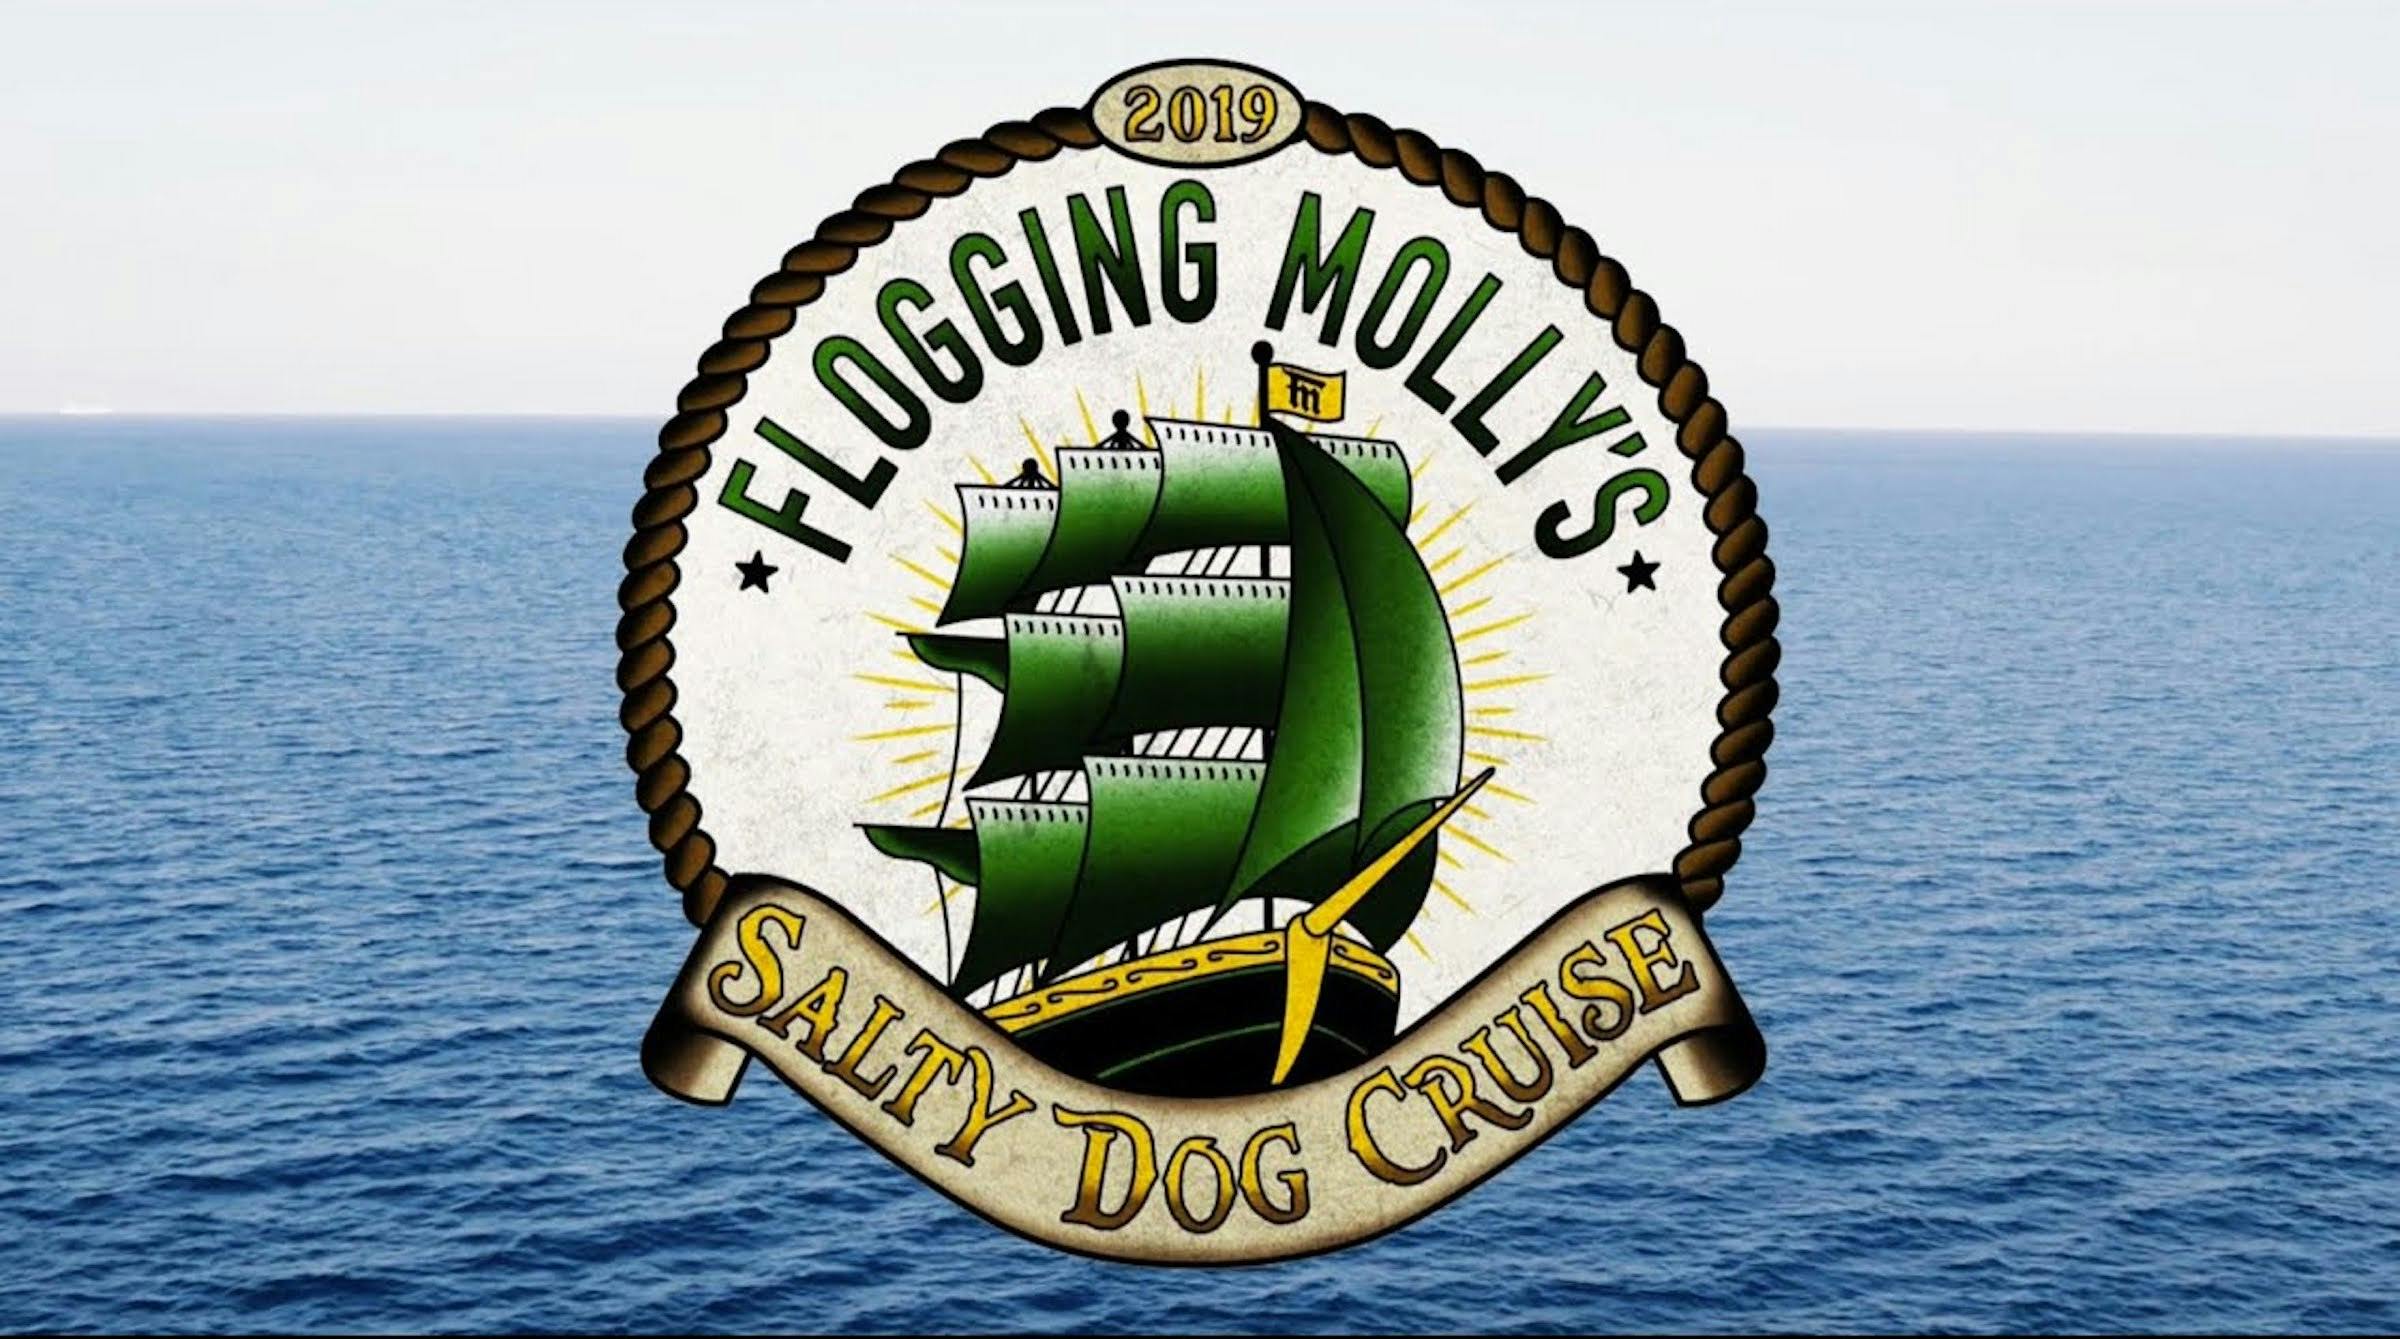 5 Insane Things You Might See On Flogging Molly's Salty Dog Cruise